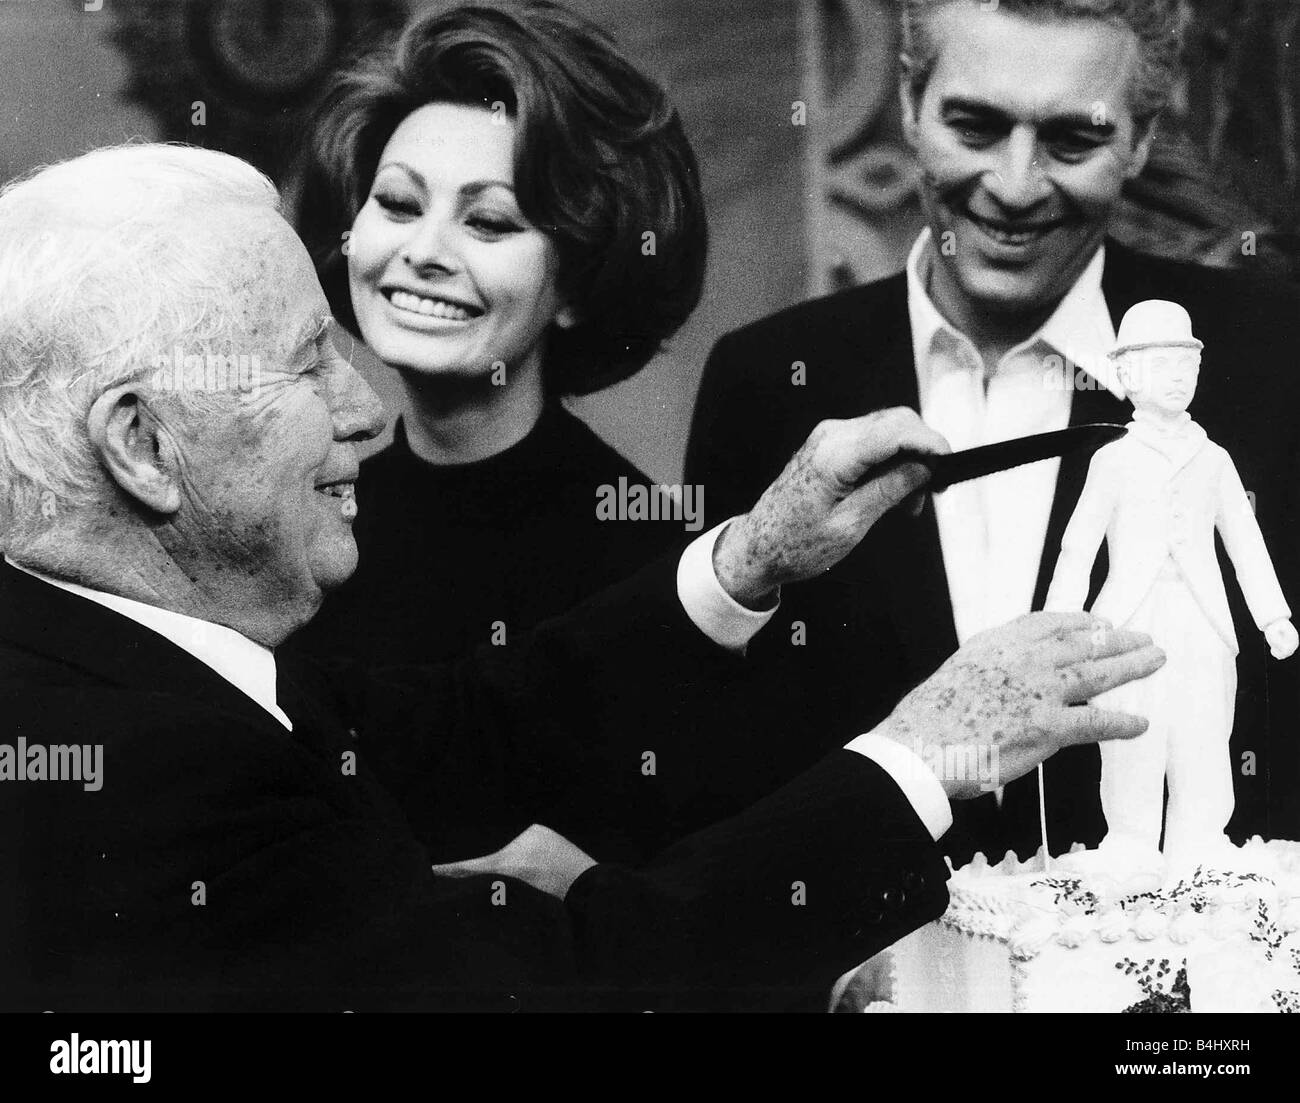 Charlie Chaplin Actor Celebrating his 77 birthday cutting a cake with Sophia Loren Actress and Son Sydney Stock Photo